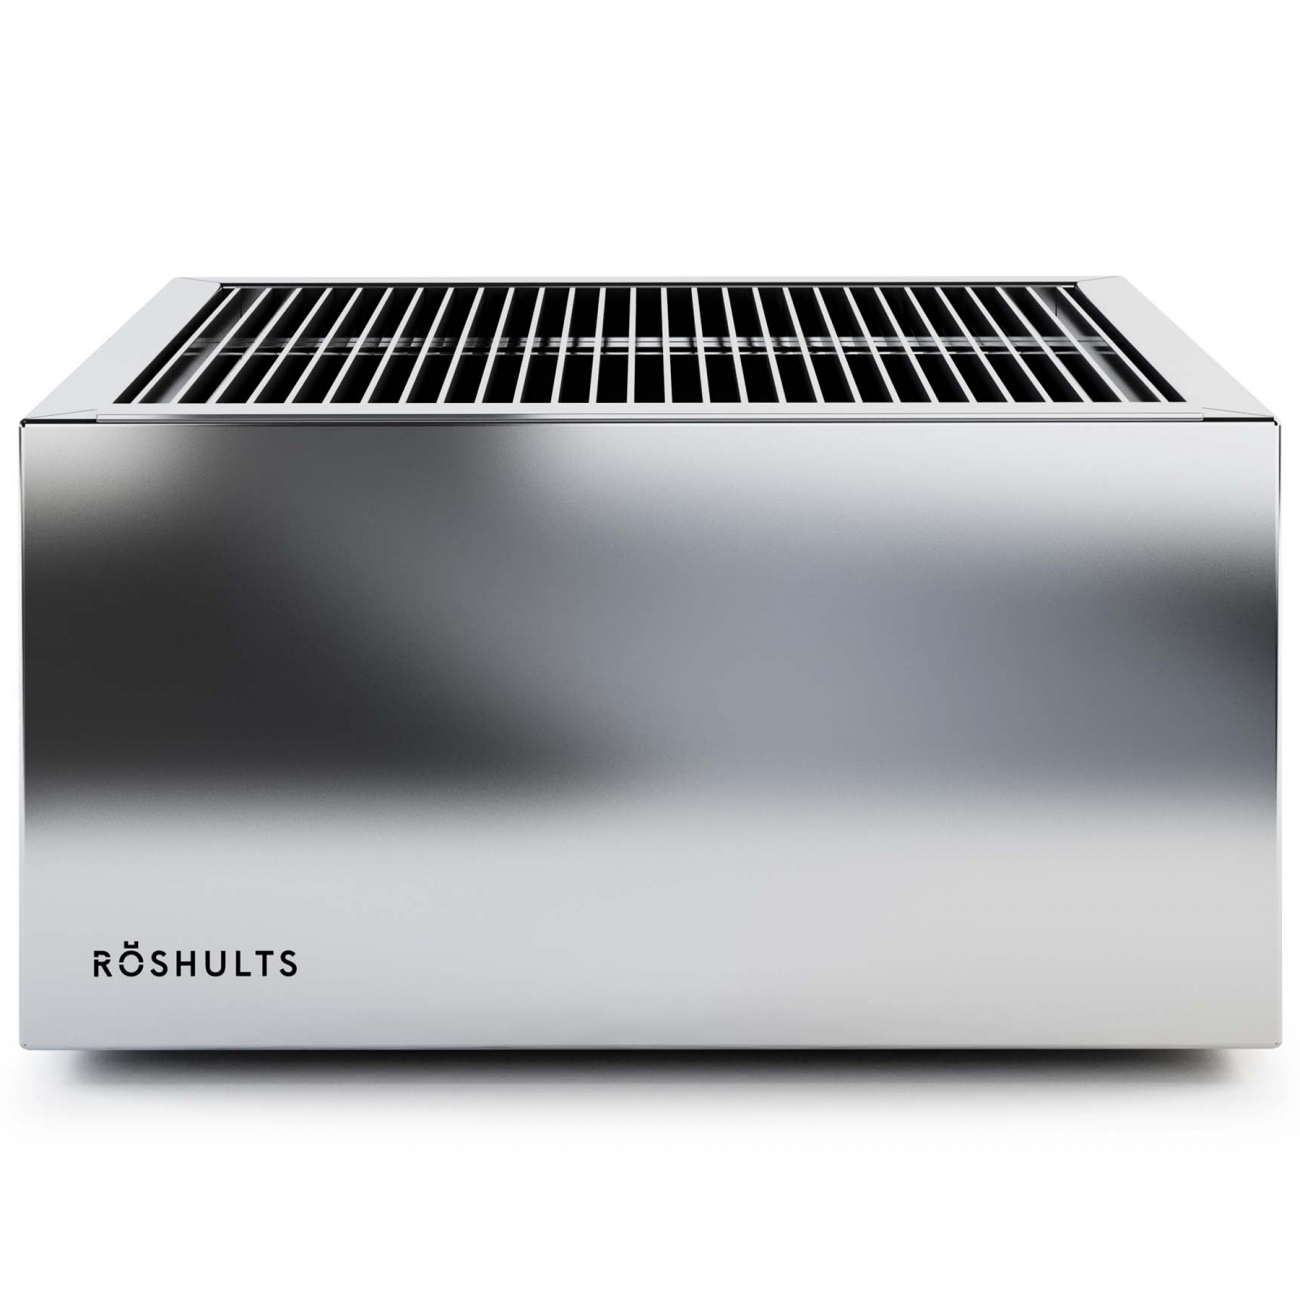 Röshults Module Charcoal Grill X Brushed Stainless Steel